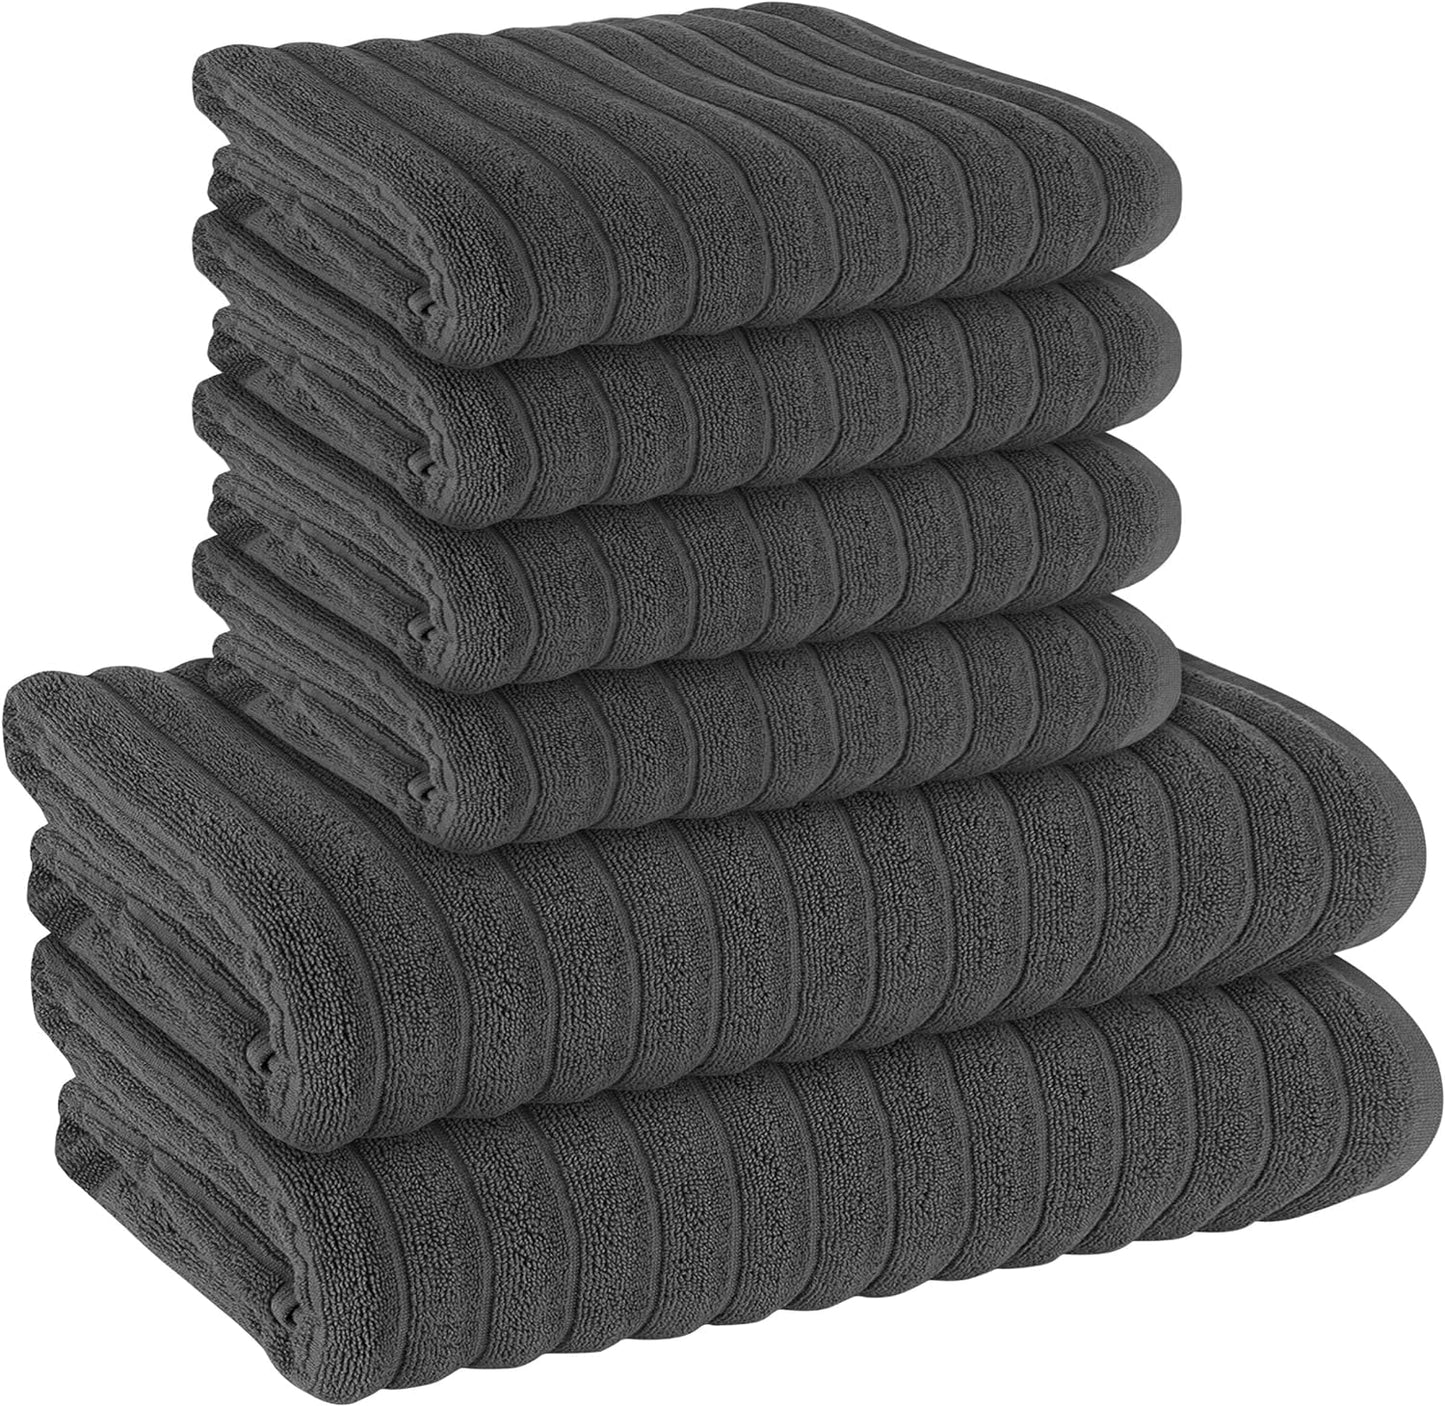 Luxurious Hydro Cotton Ribbed Towel Set by OLIVIA ROCCO Super Soft Lightweight Quick Dry Highly Absorbent Bath Sheets and Hand Towels Charcoal Bath Linens 2 Pack Jumbo Bath Sheets and 4 Hand Towels for Bathroom and Shower Durability and High Quality